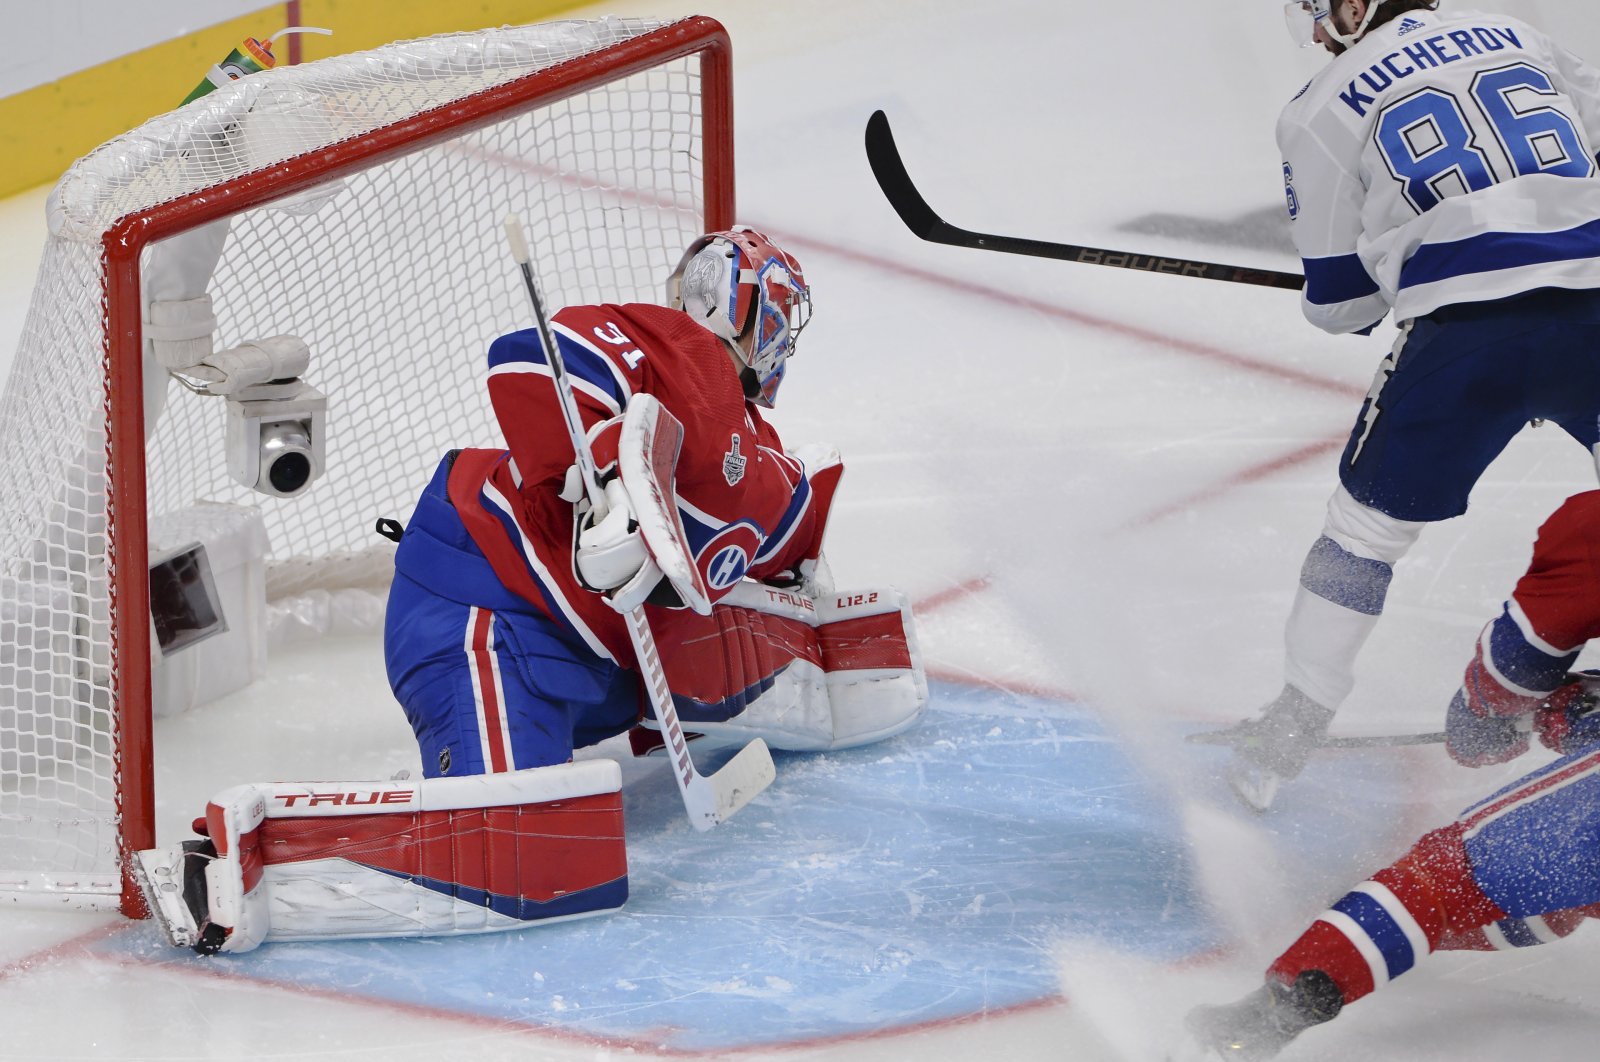 Tampa Bay Lightning's Nikita Kucherov scores on Montreal Canadiens goaltender Carey Price during the second period of Game 3 of the NHL hockey Stanley Cup Final, Montreal, U.S., July 2, 2021. (Ryan Remiorz/The Canadian Press via AP)